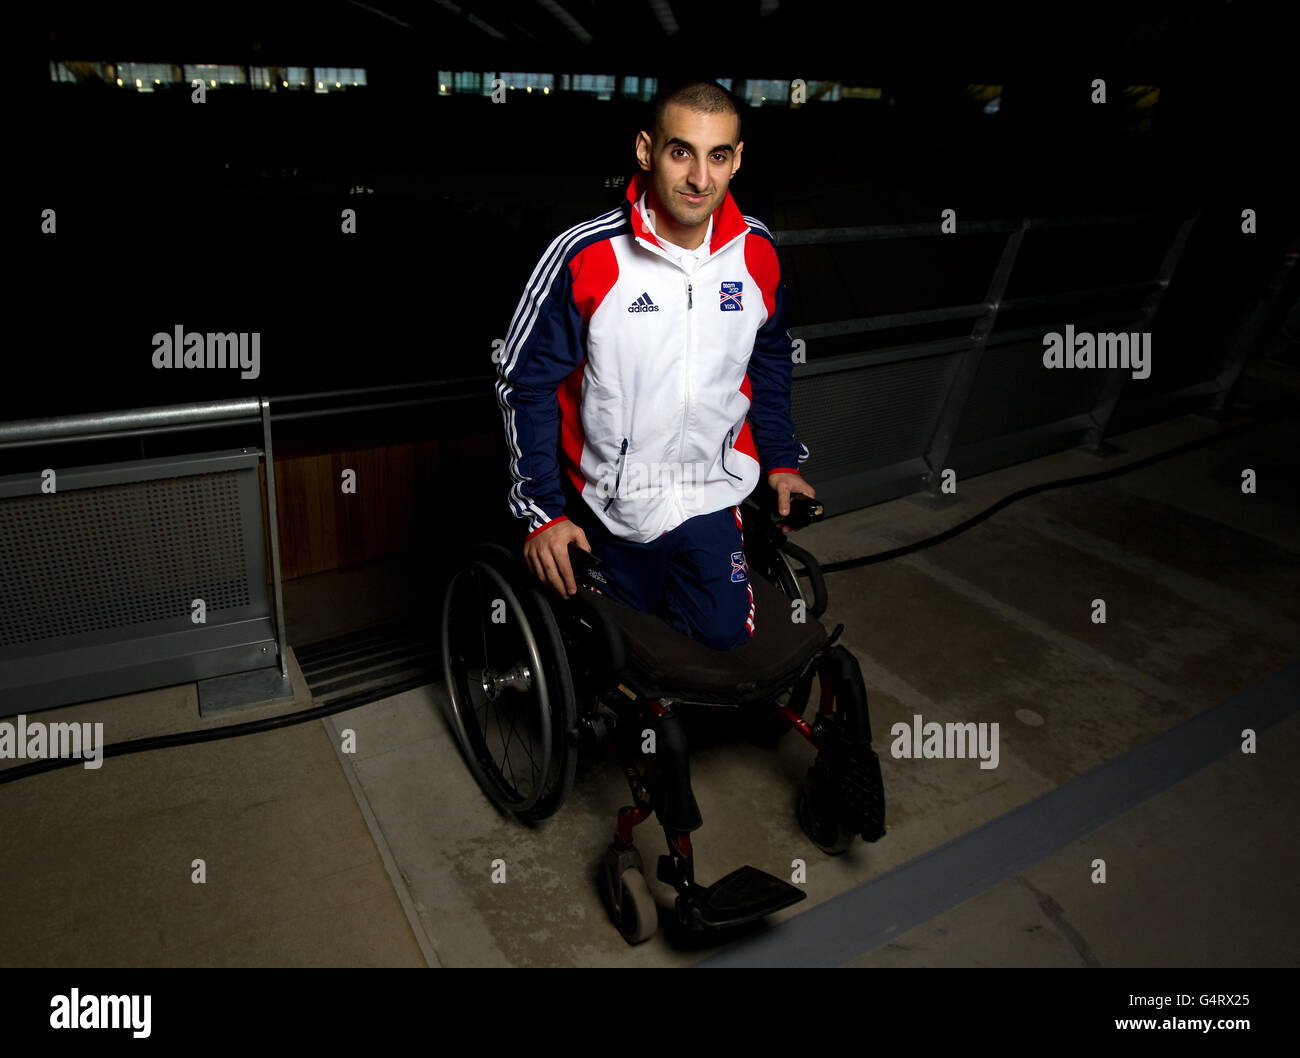 Great Britain weightlifter Ali Jawad during the photocall at the Velodrome in the Olympic Park, London. Over 30 London 2012 hopefuls came together to prepare for the Games. Team 2012, presented by Visa, is raising funds for 1,200 British athletes at www.team-2012.com. Stock Photo